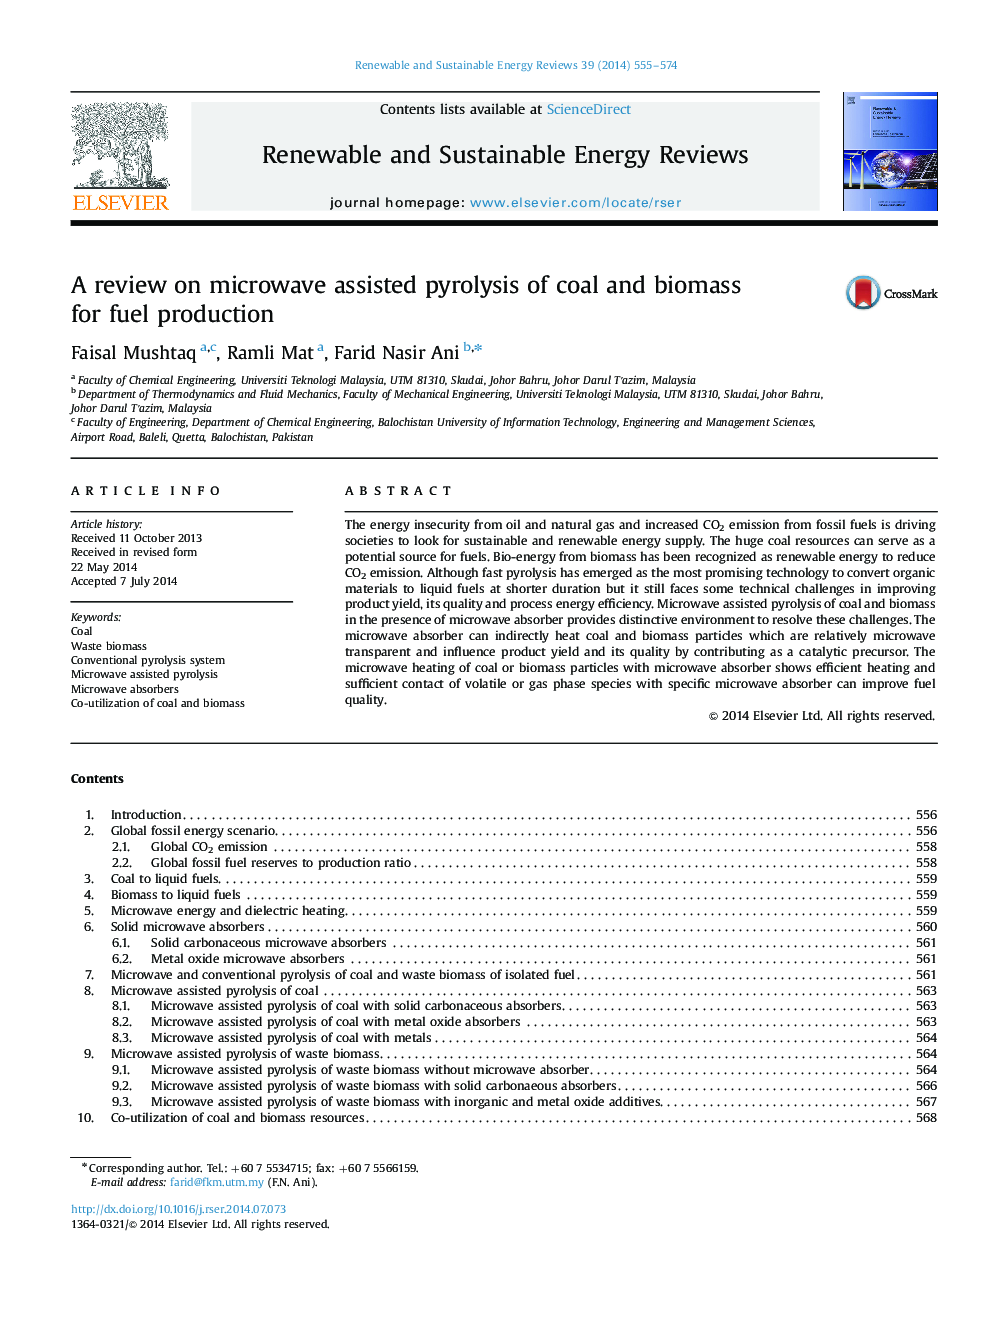 A review on microwave assisted pyrolysis of coal and biomass for fuel production